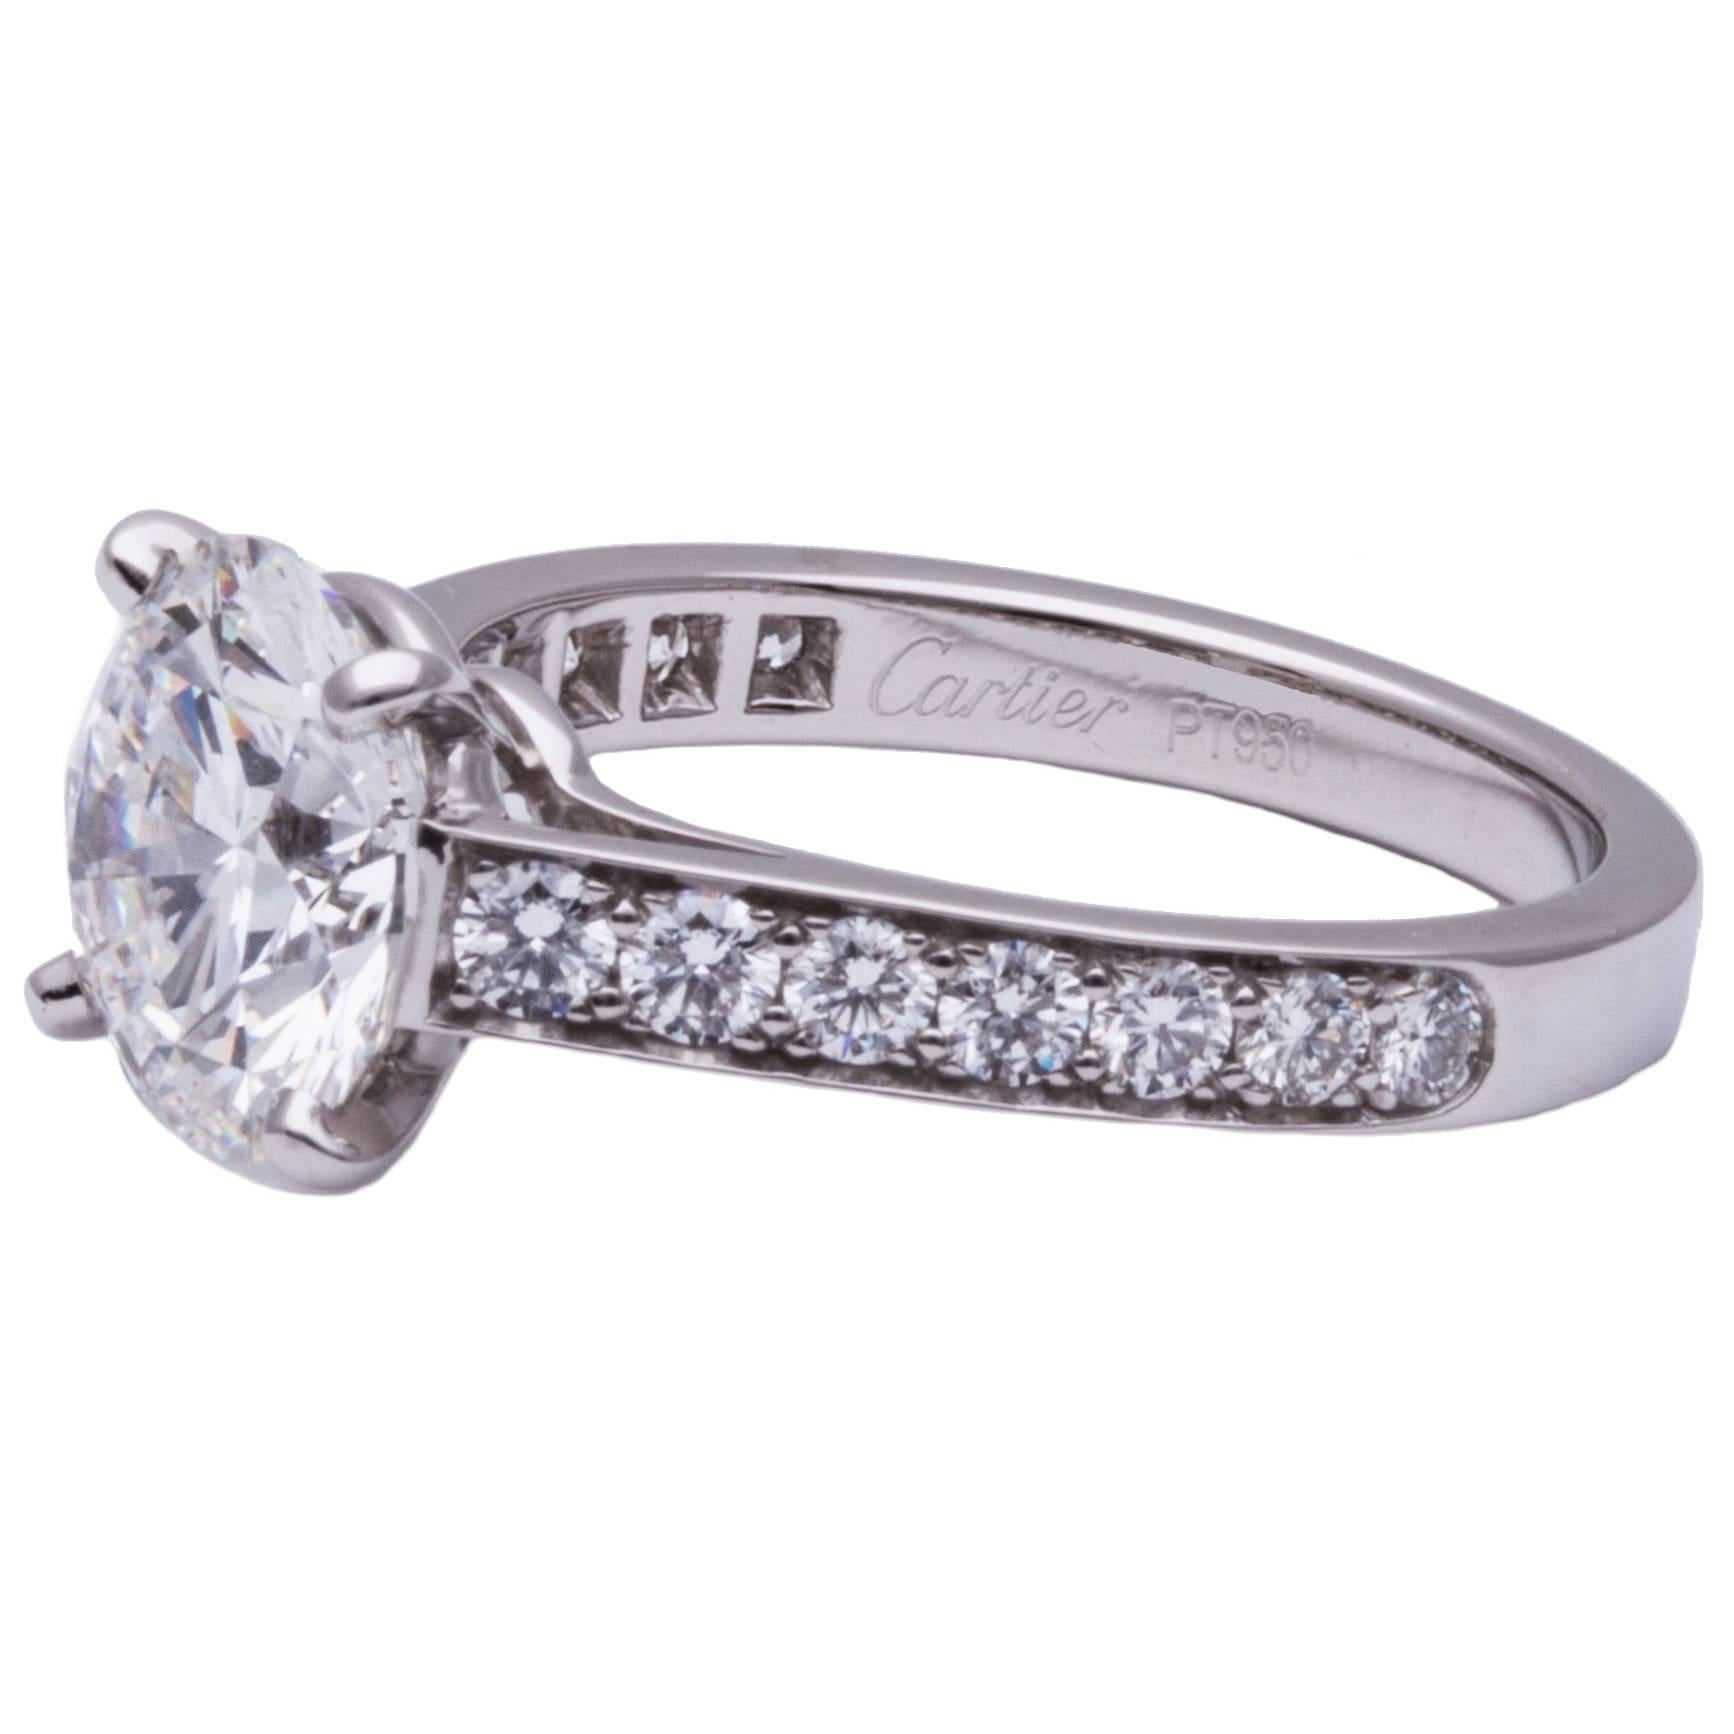 Cartier diamond ring/ Engagement ring in platinum, Center stone 3.04ct. F/ VVS2 GIA Certified Round Diamond, Total (14) brilliant cut diamond side stones on the shank/ (7) on each side of the center stone, Size US 7 1/8 / EUR 55, Signed: 